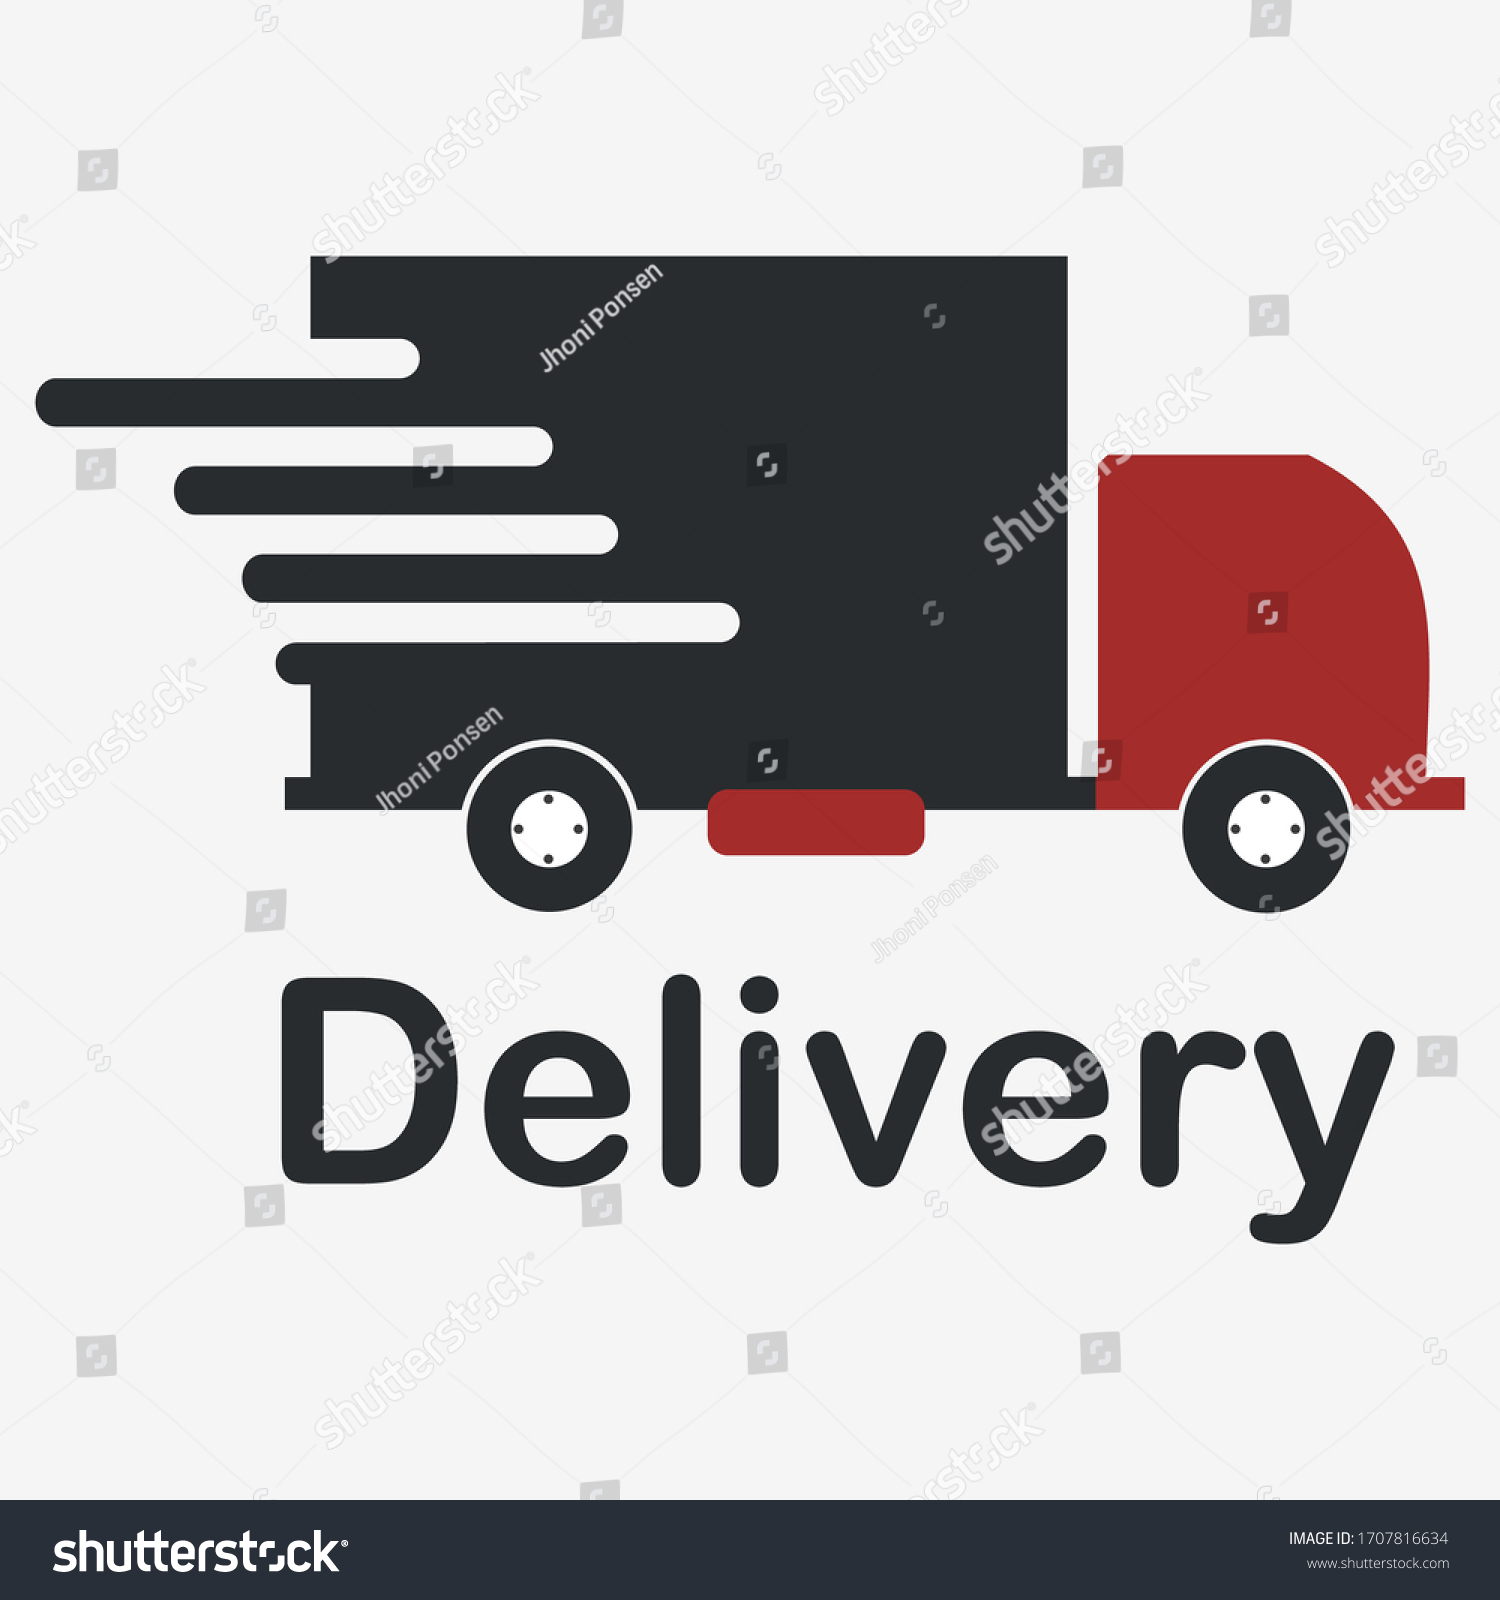 Car Illustration Cartoon Style Delivery Car Stock Vector (Royalty Free ...